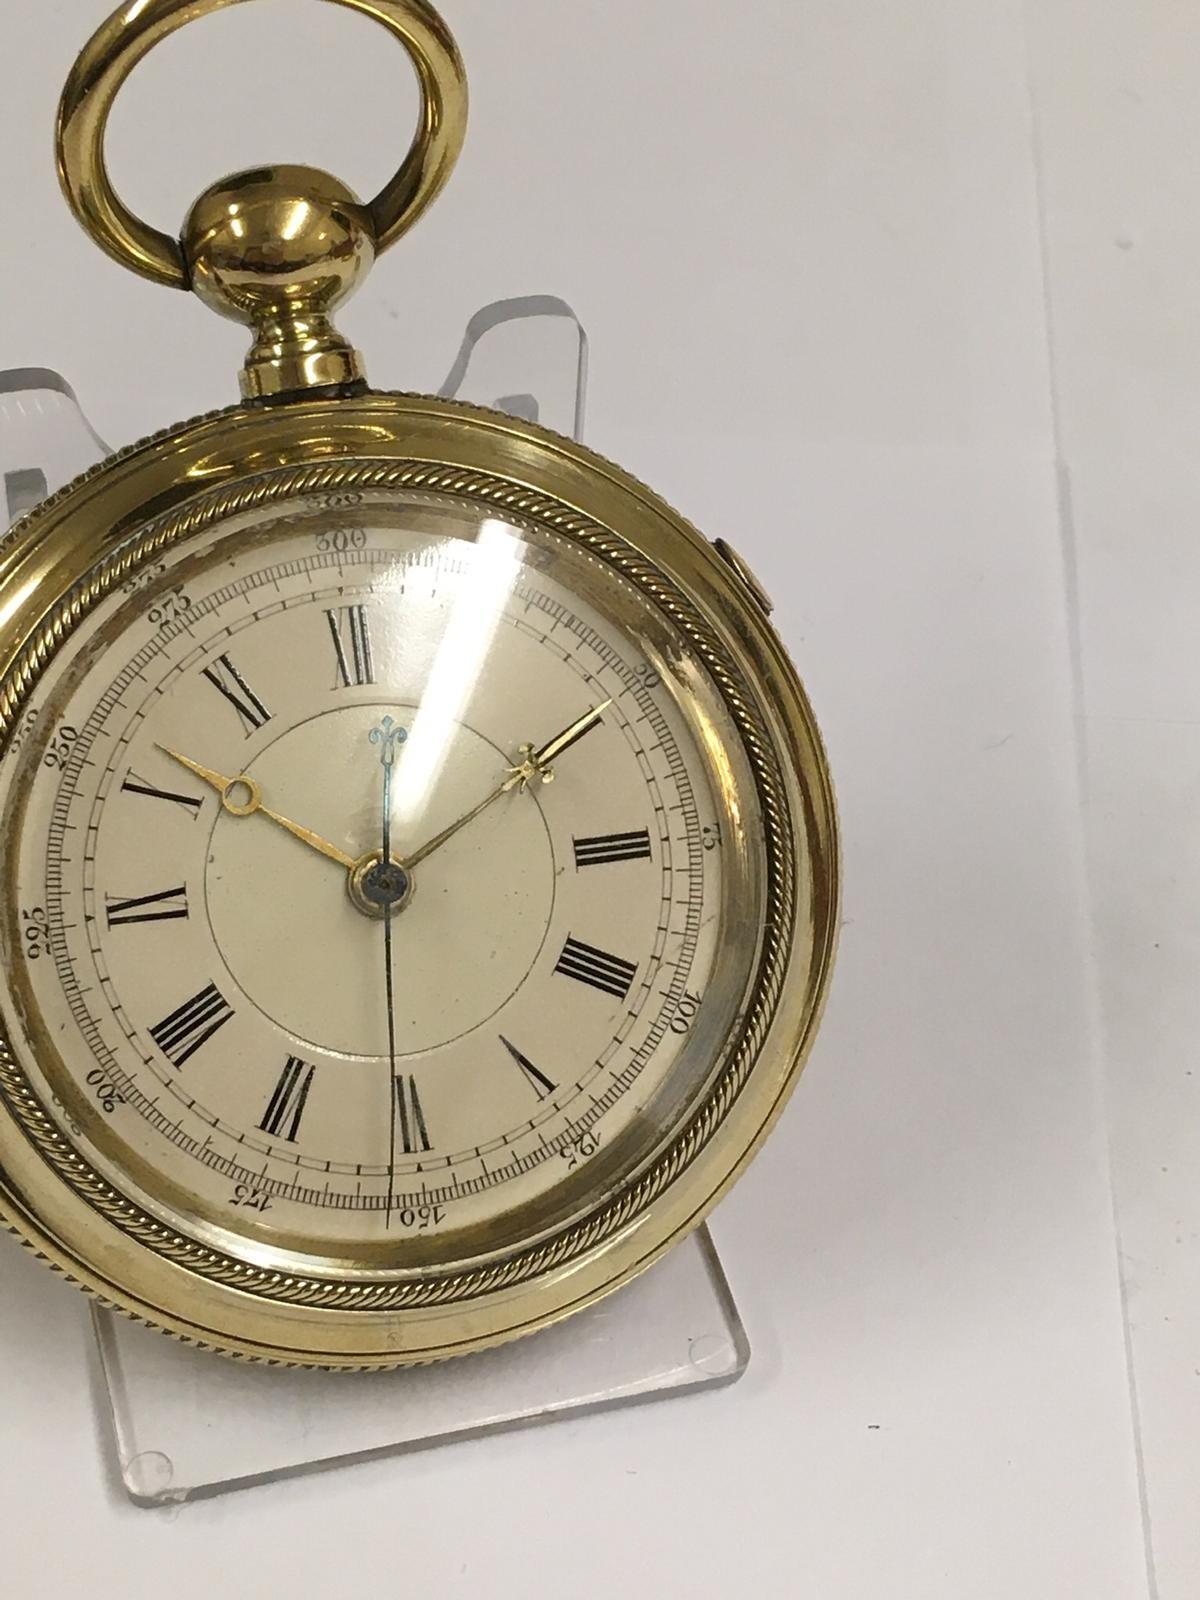 Antique Goliath pocket watch and very large antique Chronograph pocket watch (2) - Image 6 of 11